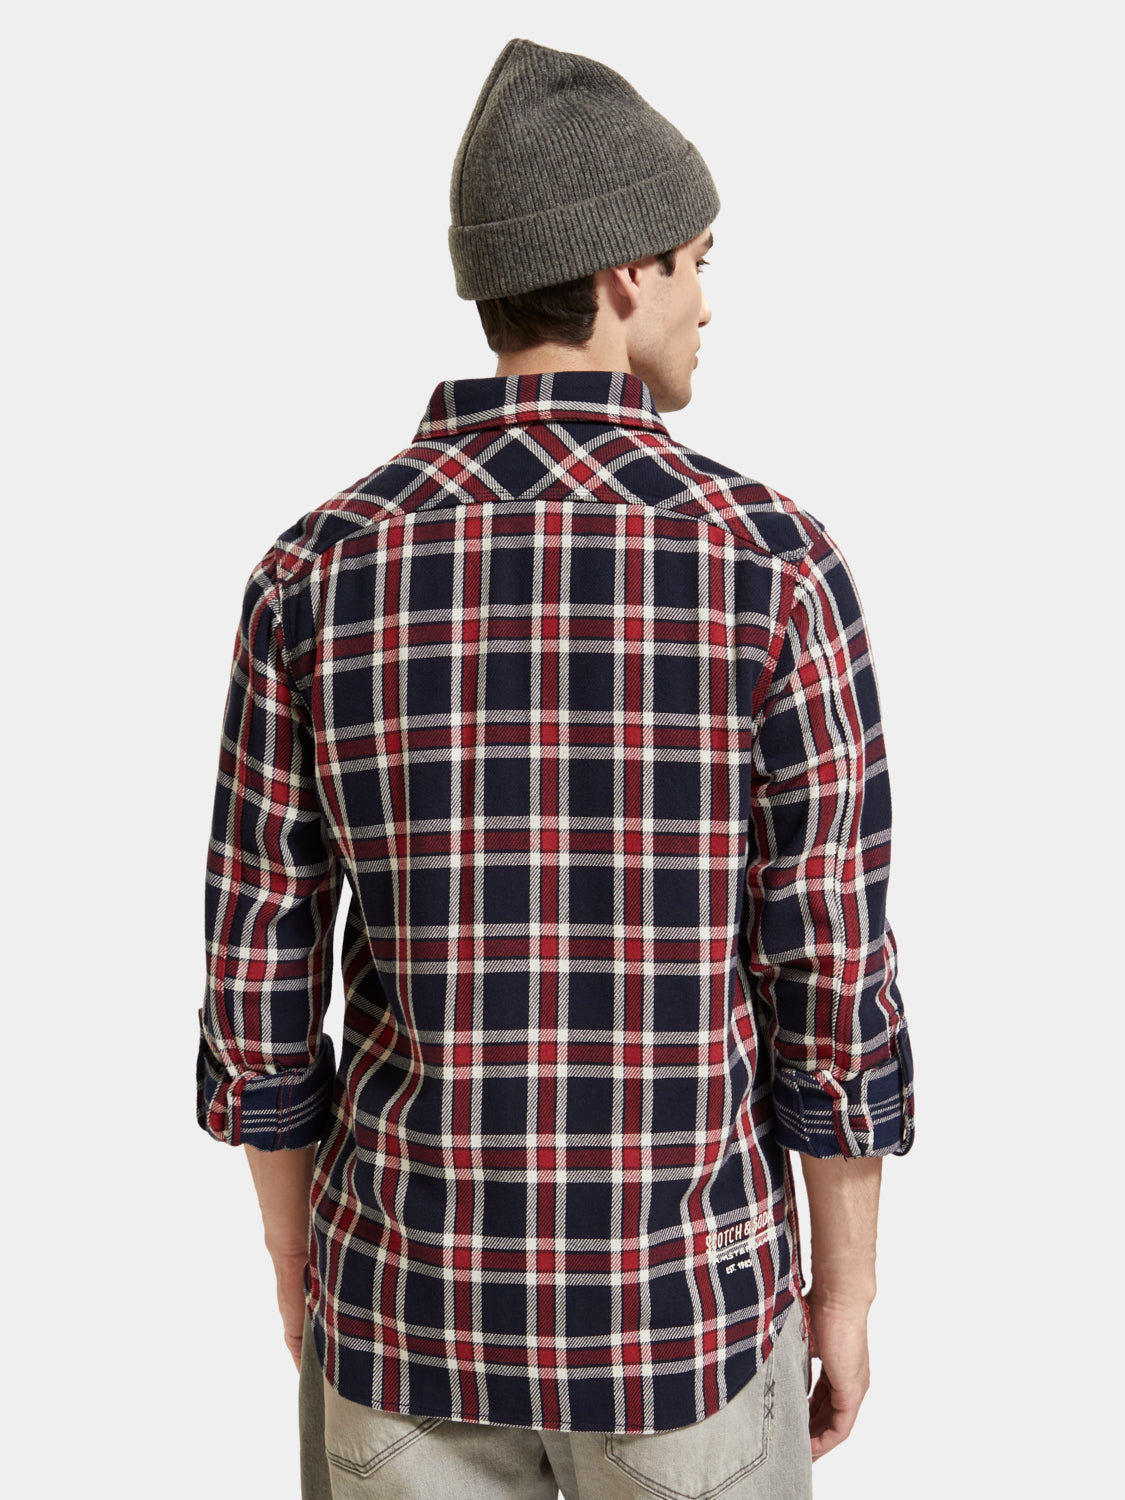 Double-faced twill check shirt - Red Blue Check